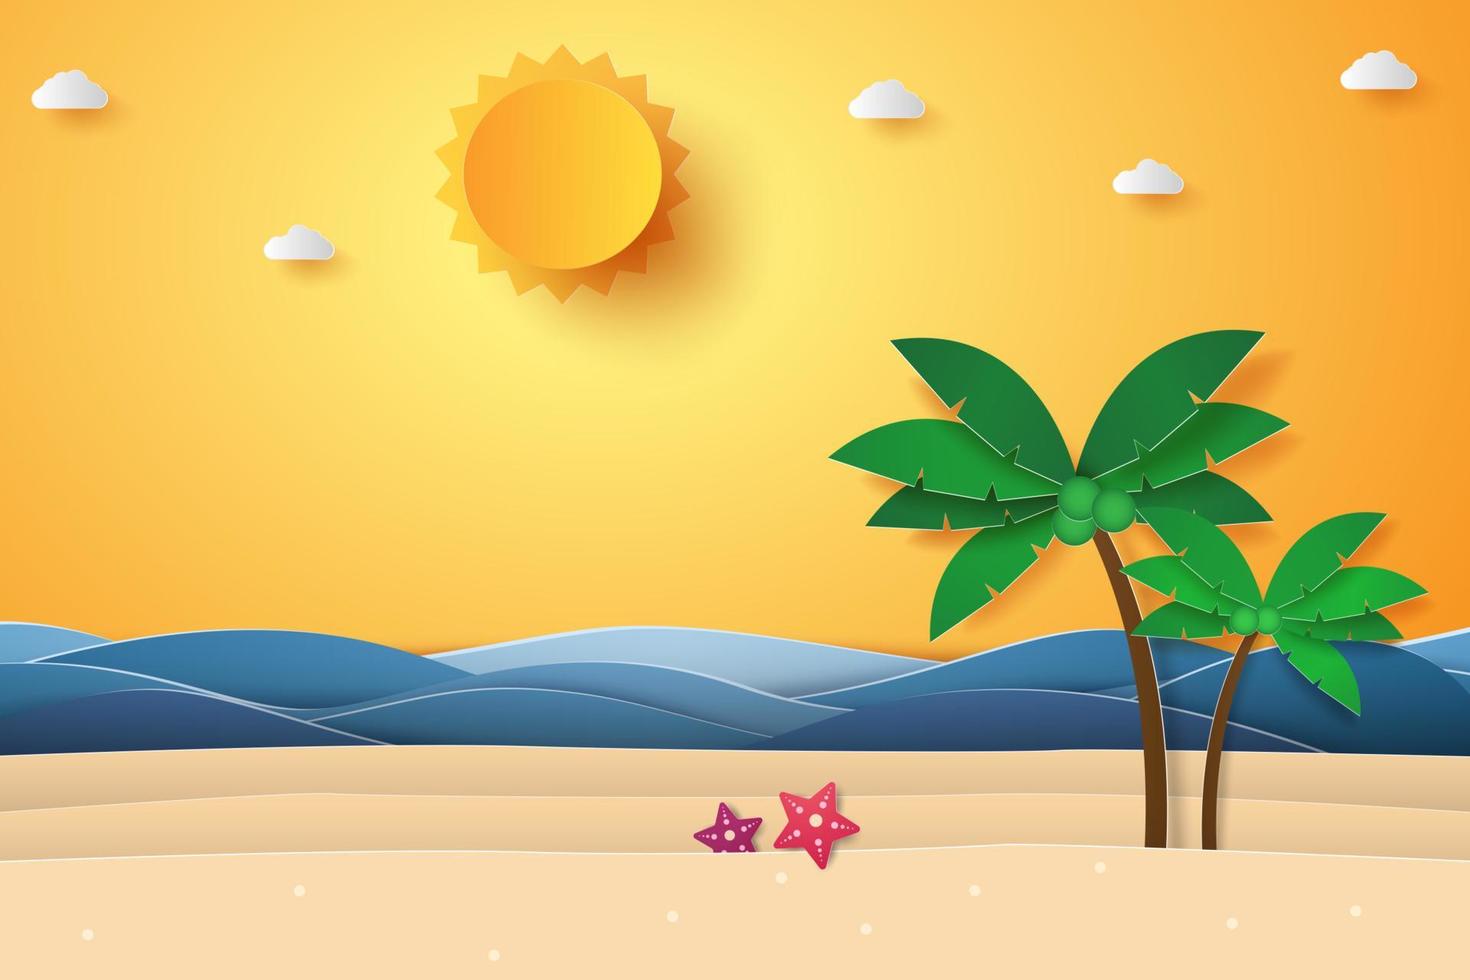 Seascape with coconut tree on beach and island, paper art style vector